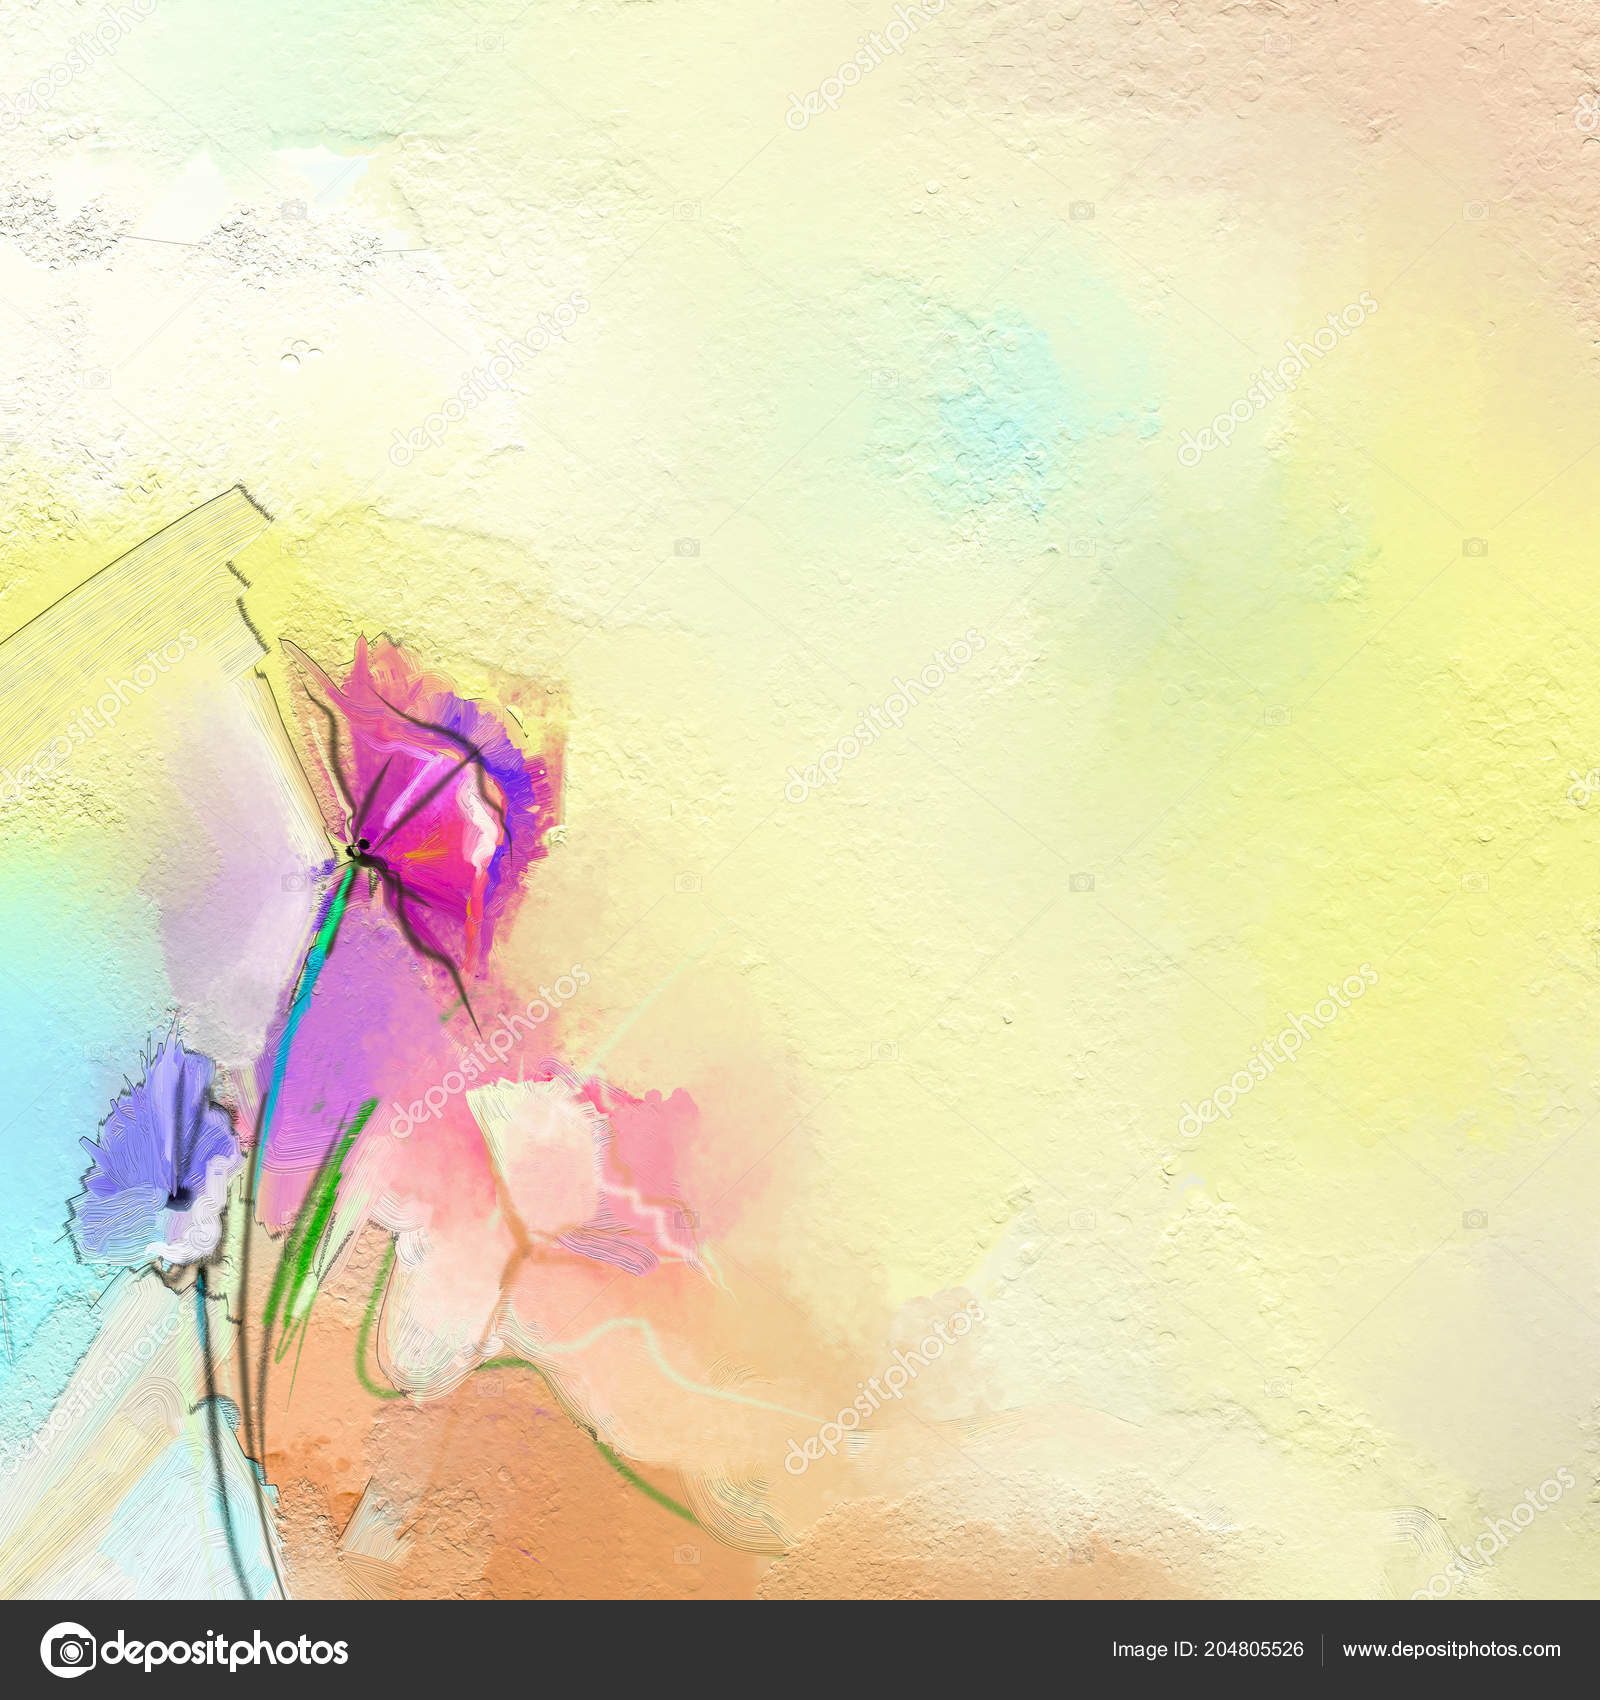 Abstract Colorful Oil Painting Canvas Semi Abstract Image Daisy Flower Stock Photo C Nongkran Ch 204805526